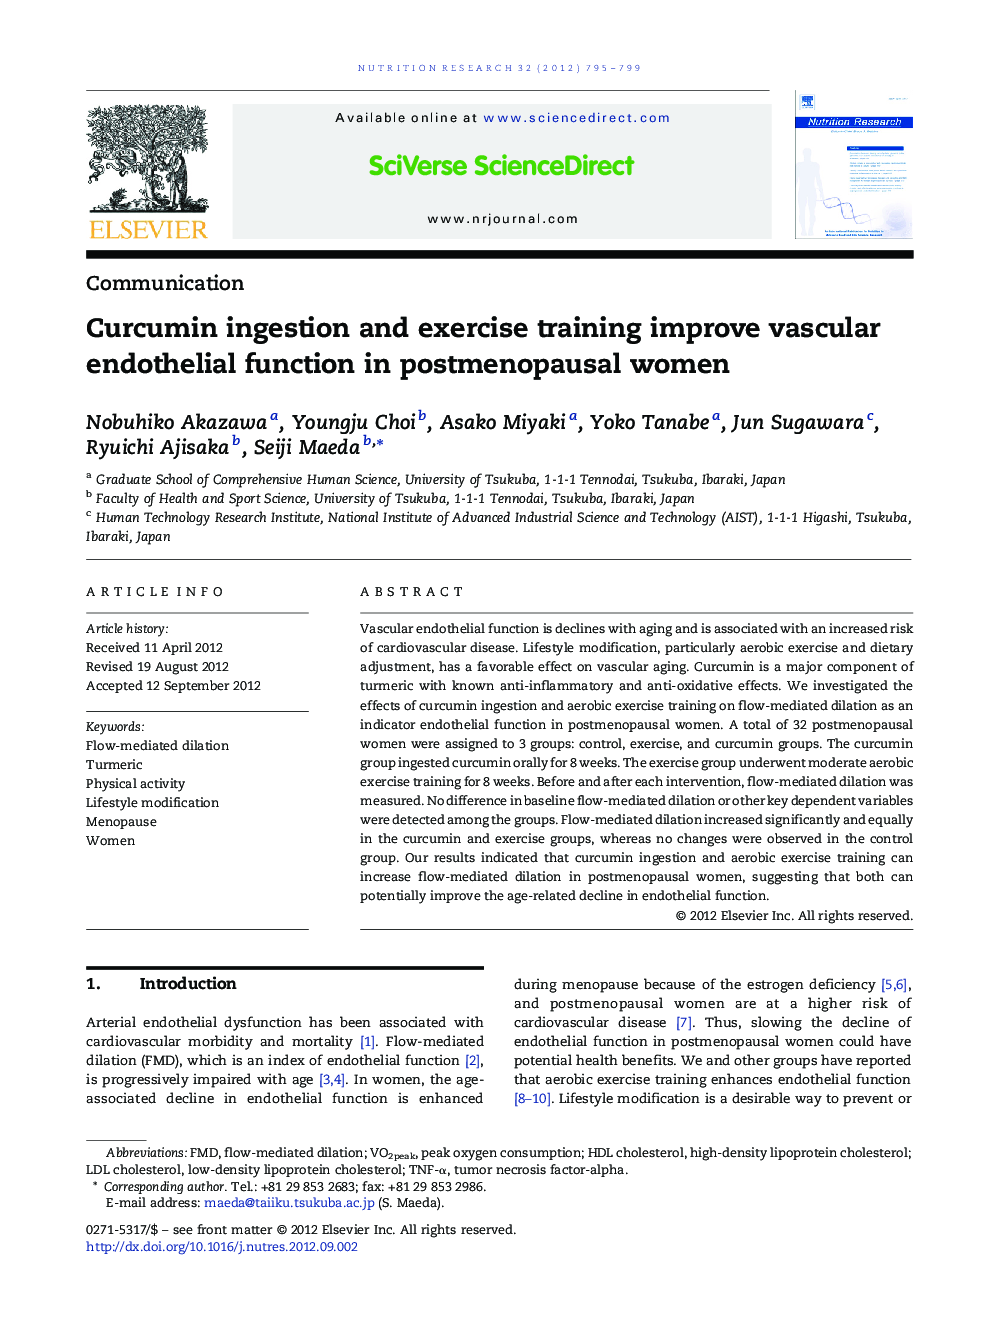 Curcumin ingestion and exercise training improve vascular endothelial function in postmenopausal women